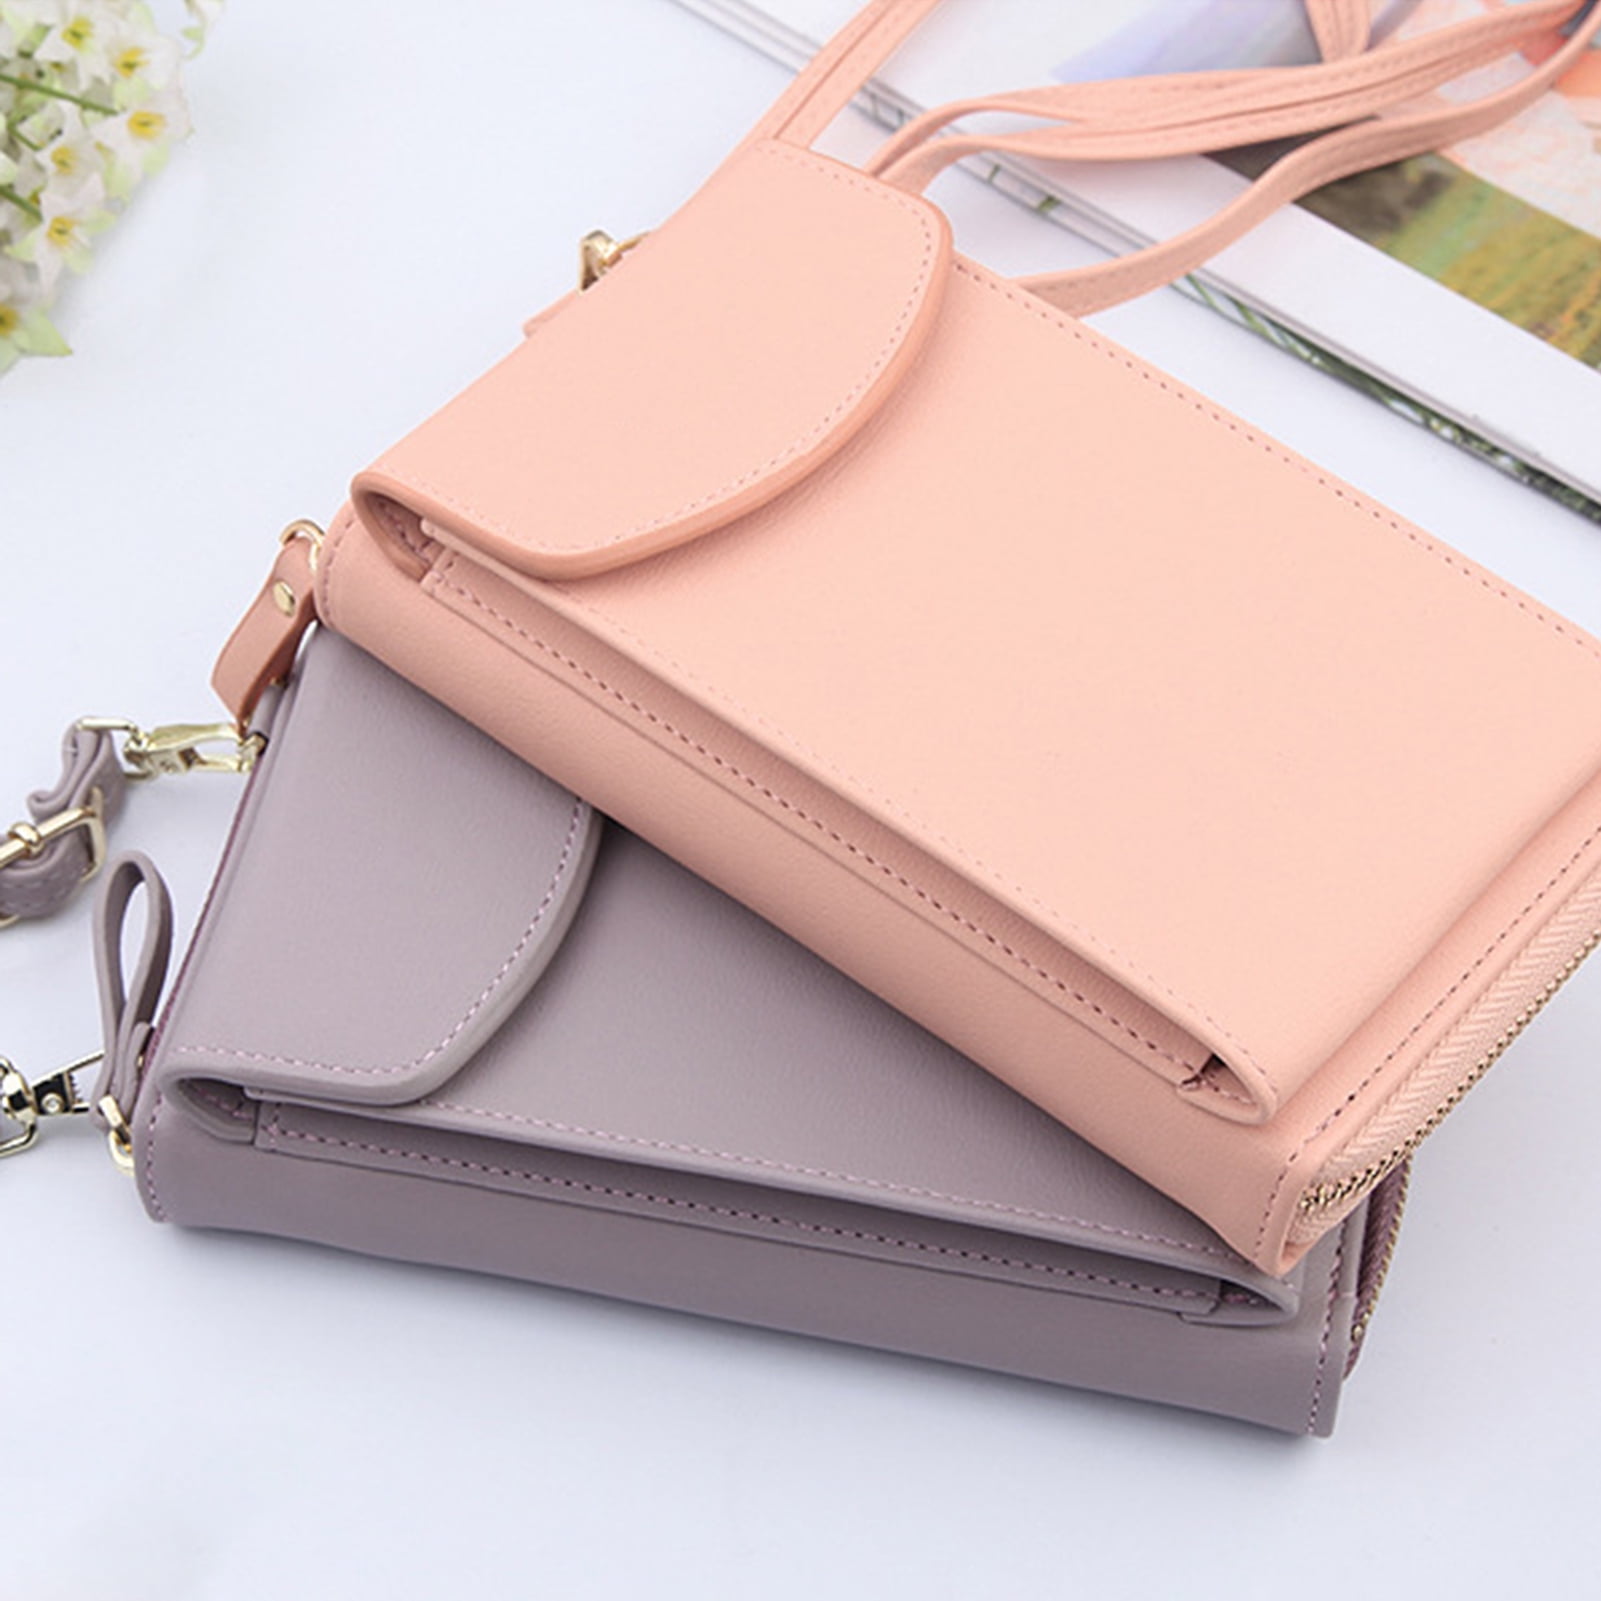 Crossbody Bags for Women Leather Ladies Shoulder Purses with Chain Strap  Stylish Clutch Purse - Walmart.com